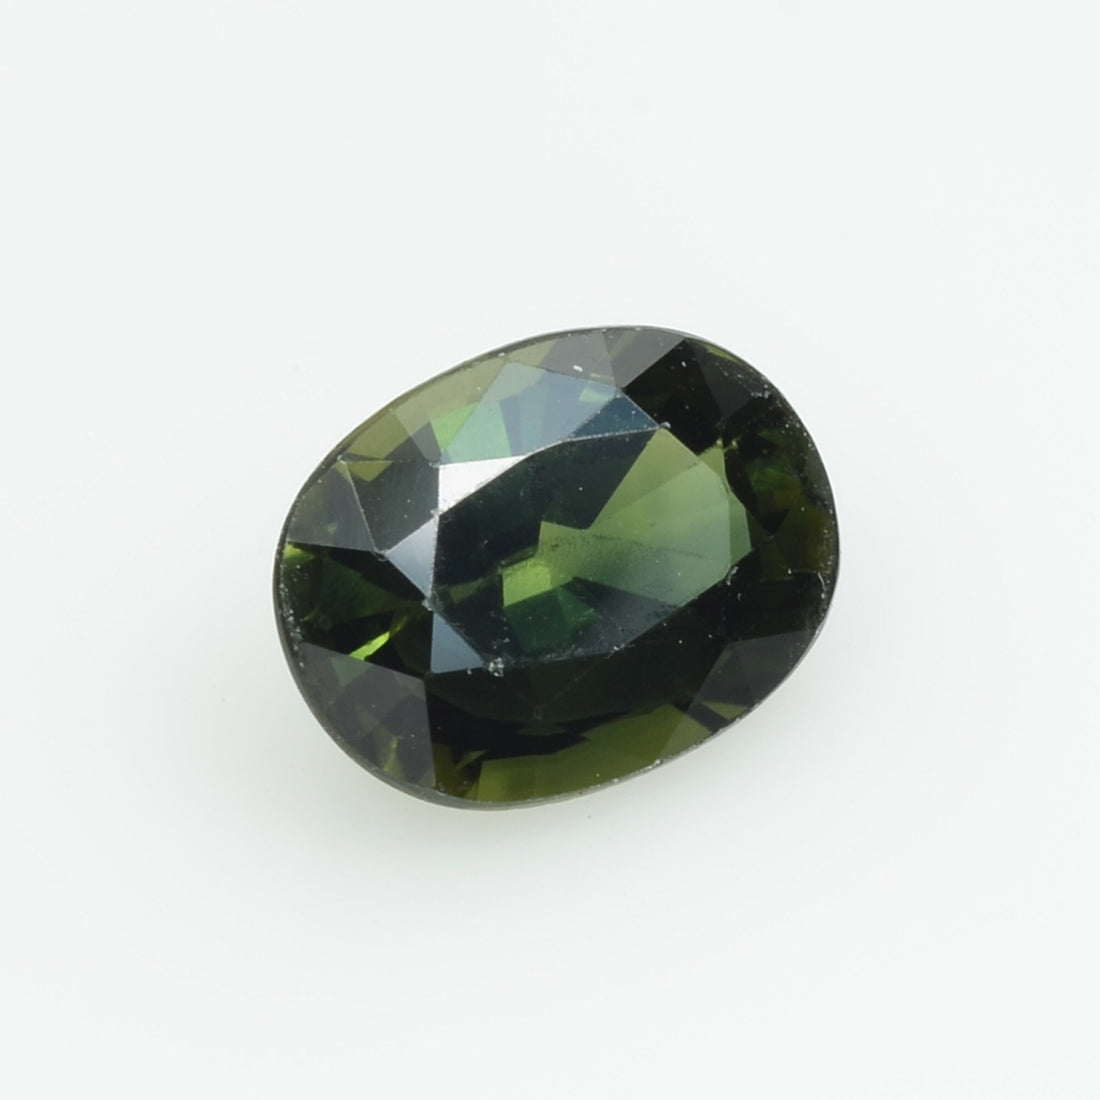 1.90 cts Natural Green Sapphire Loose Gemstone Oval Cut